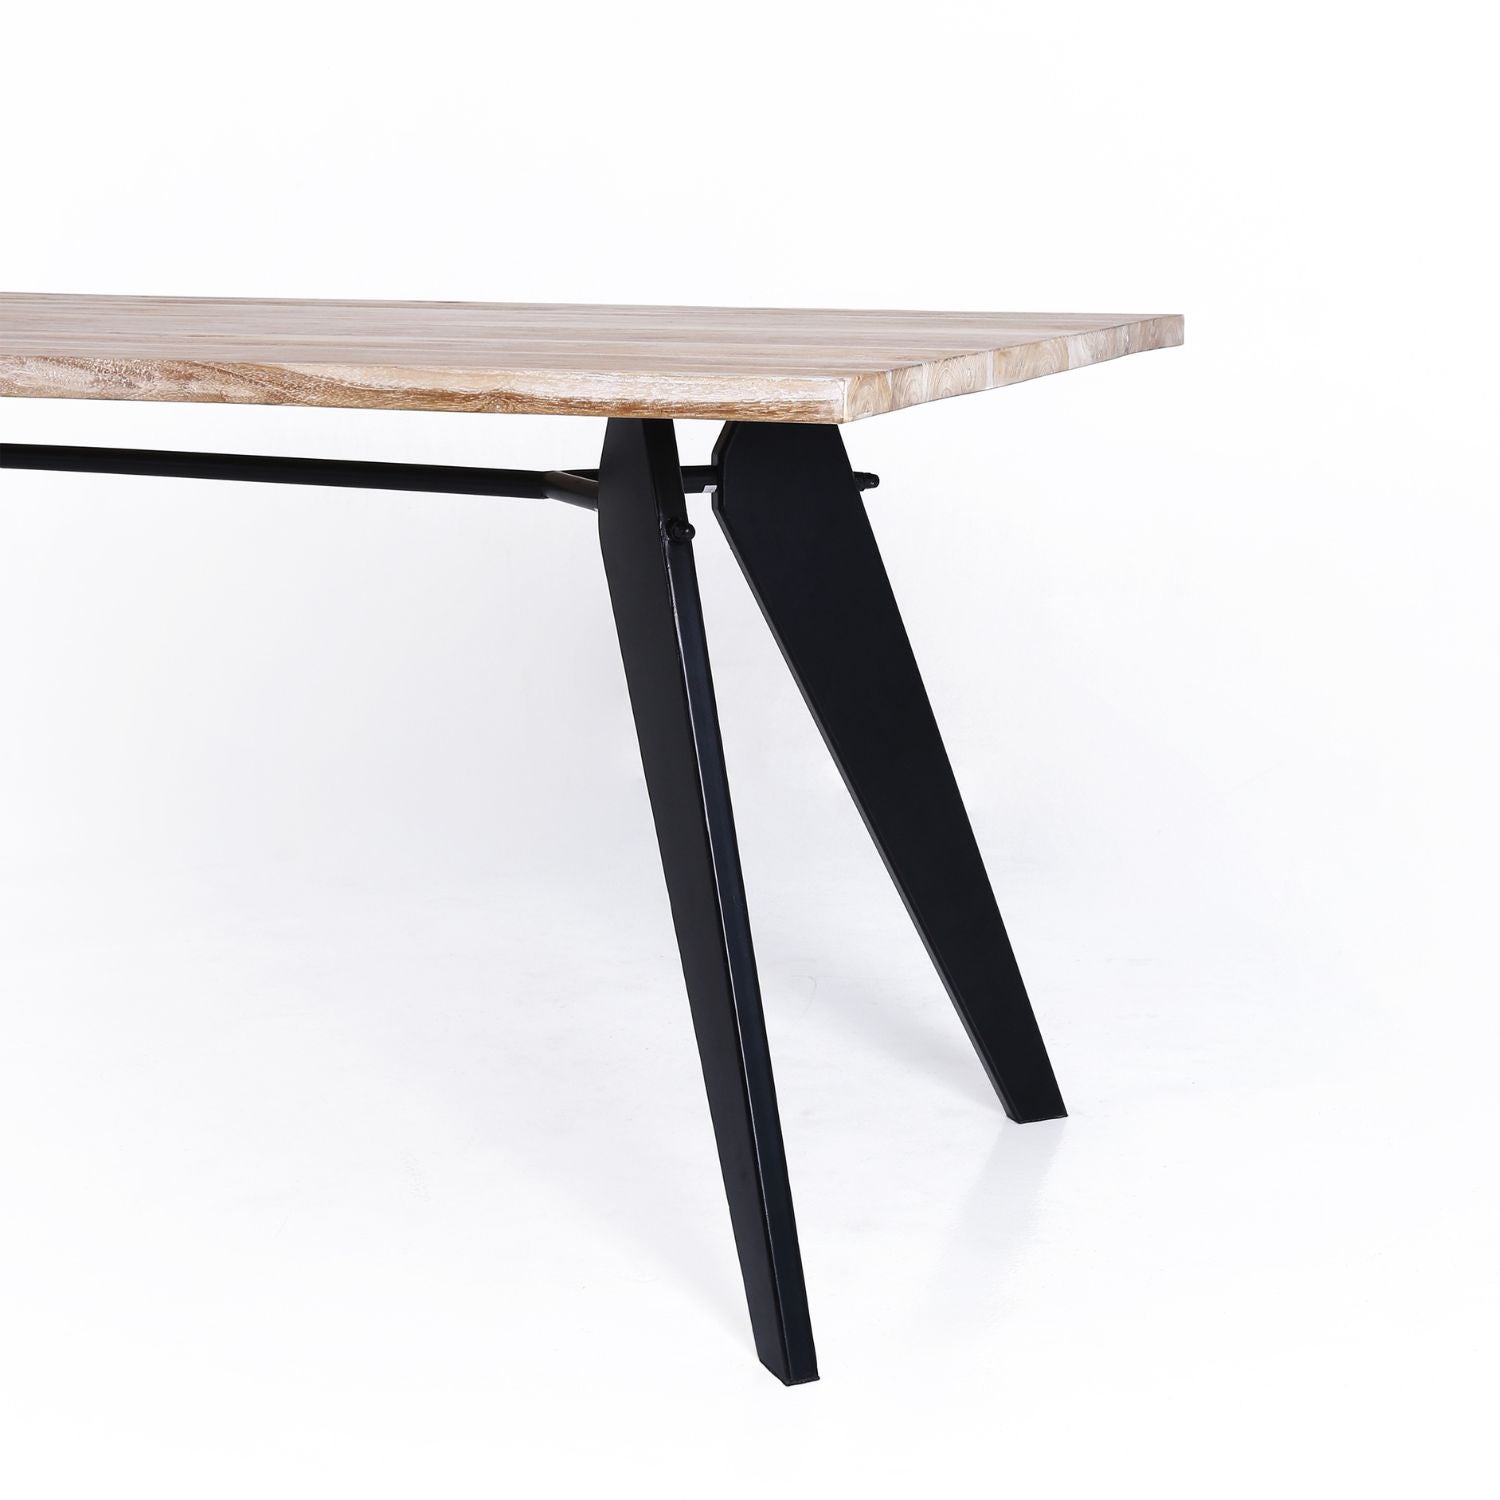 Brades Dining Table - Valyou 